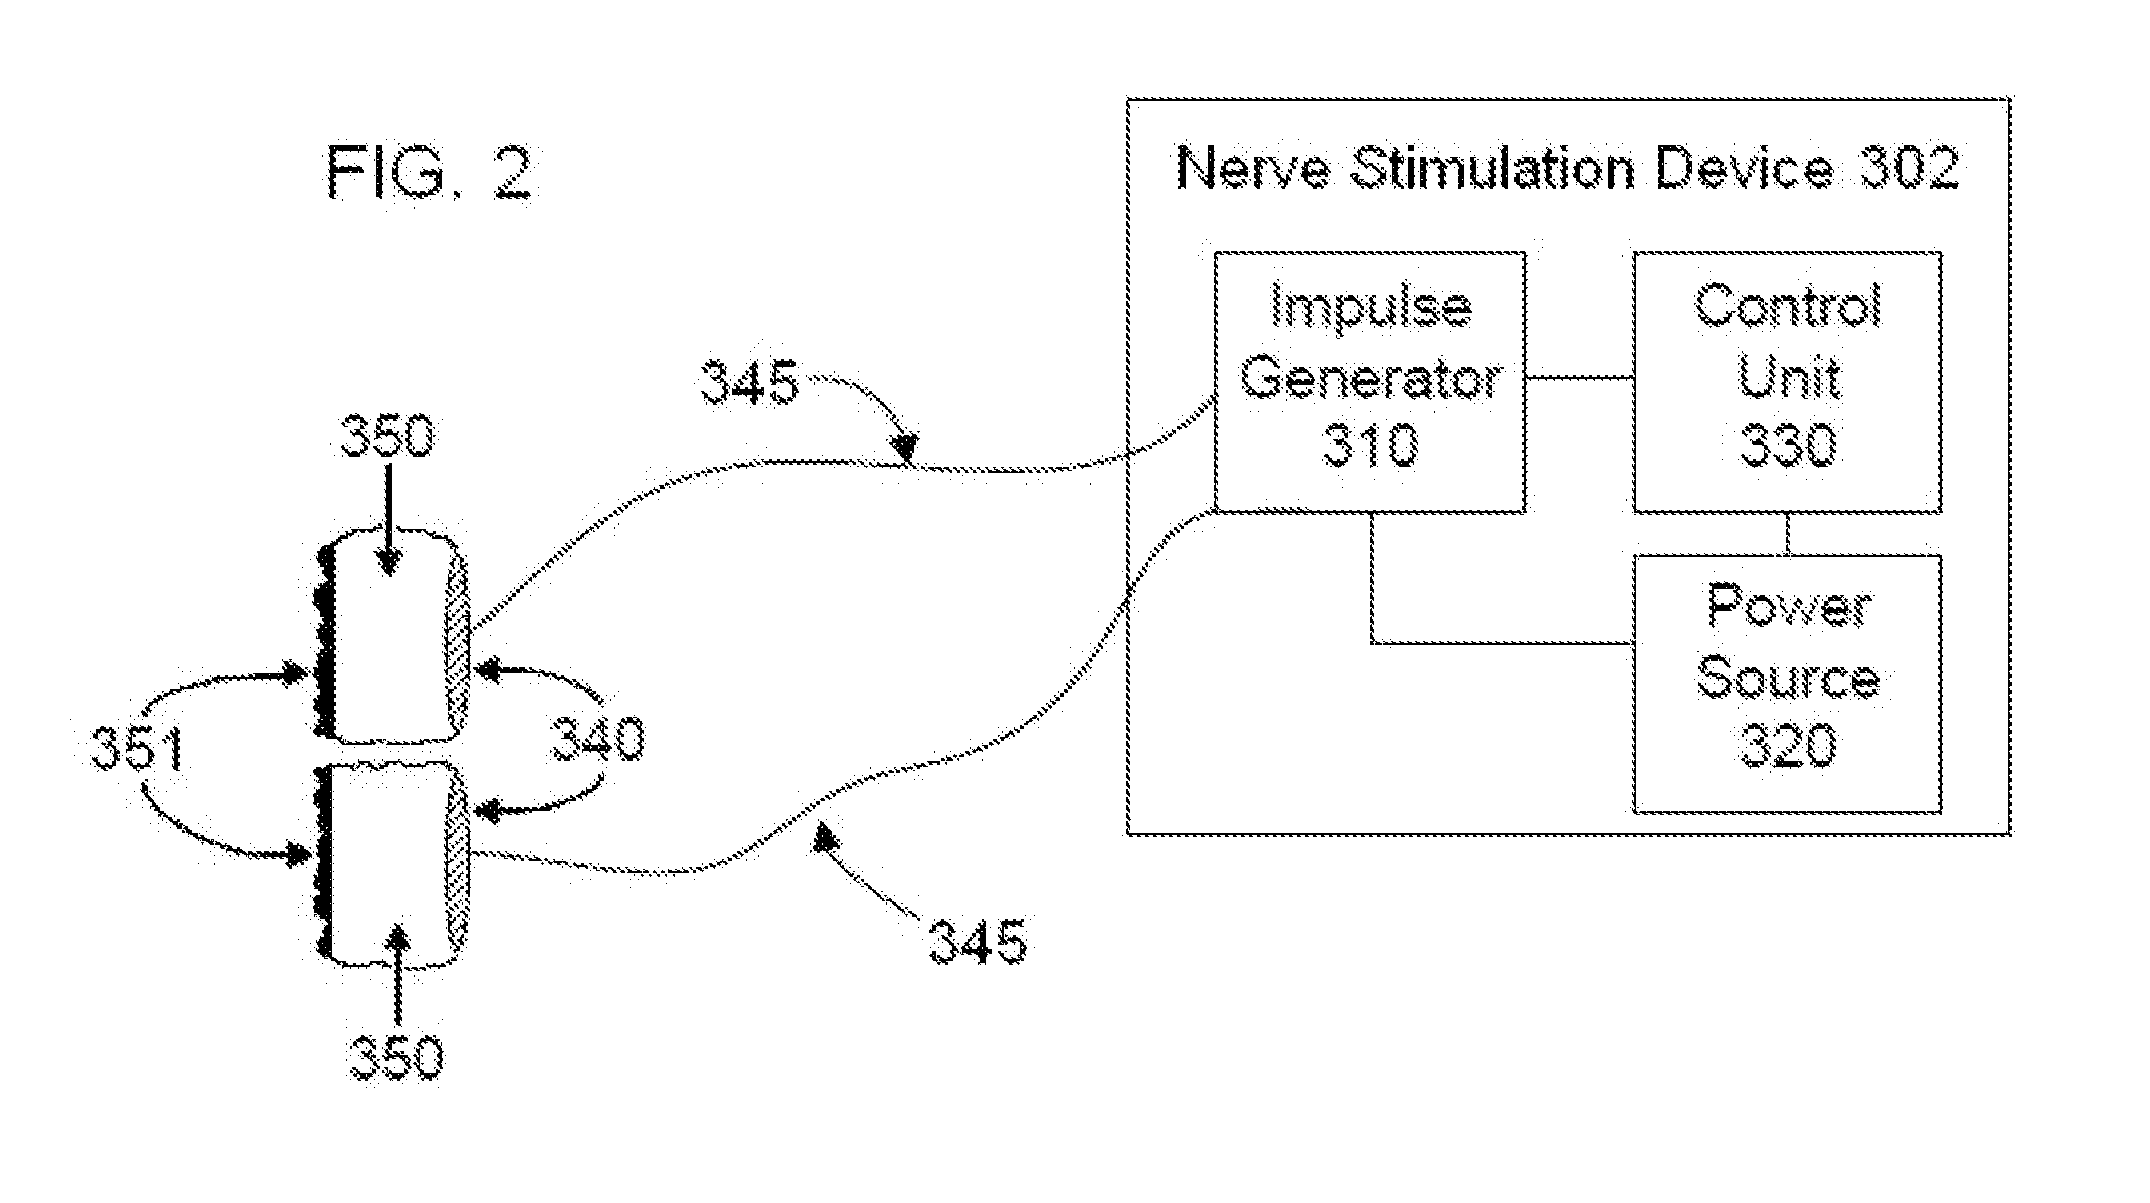 Systems and methods of biofeedback using nerve stimulation